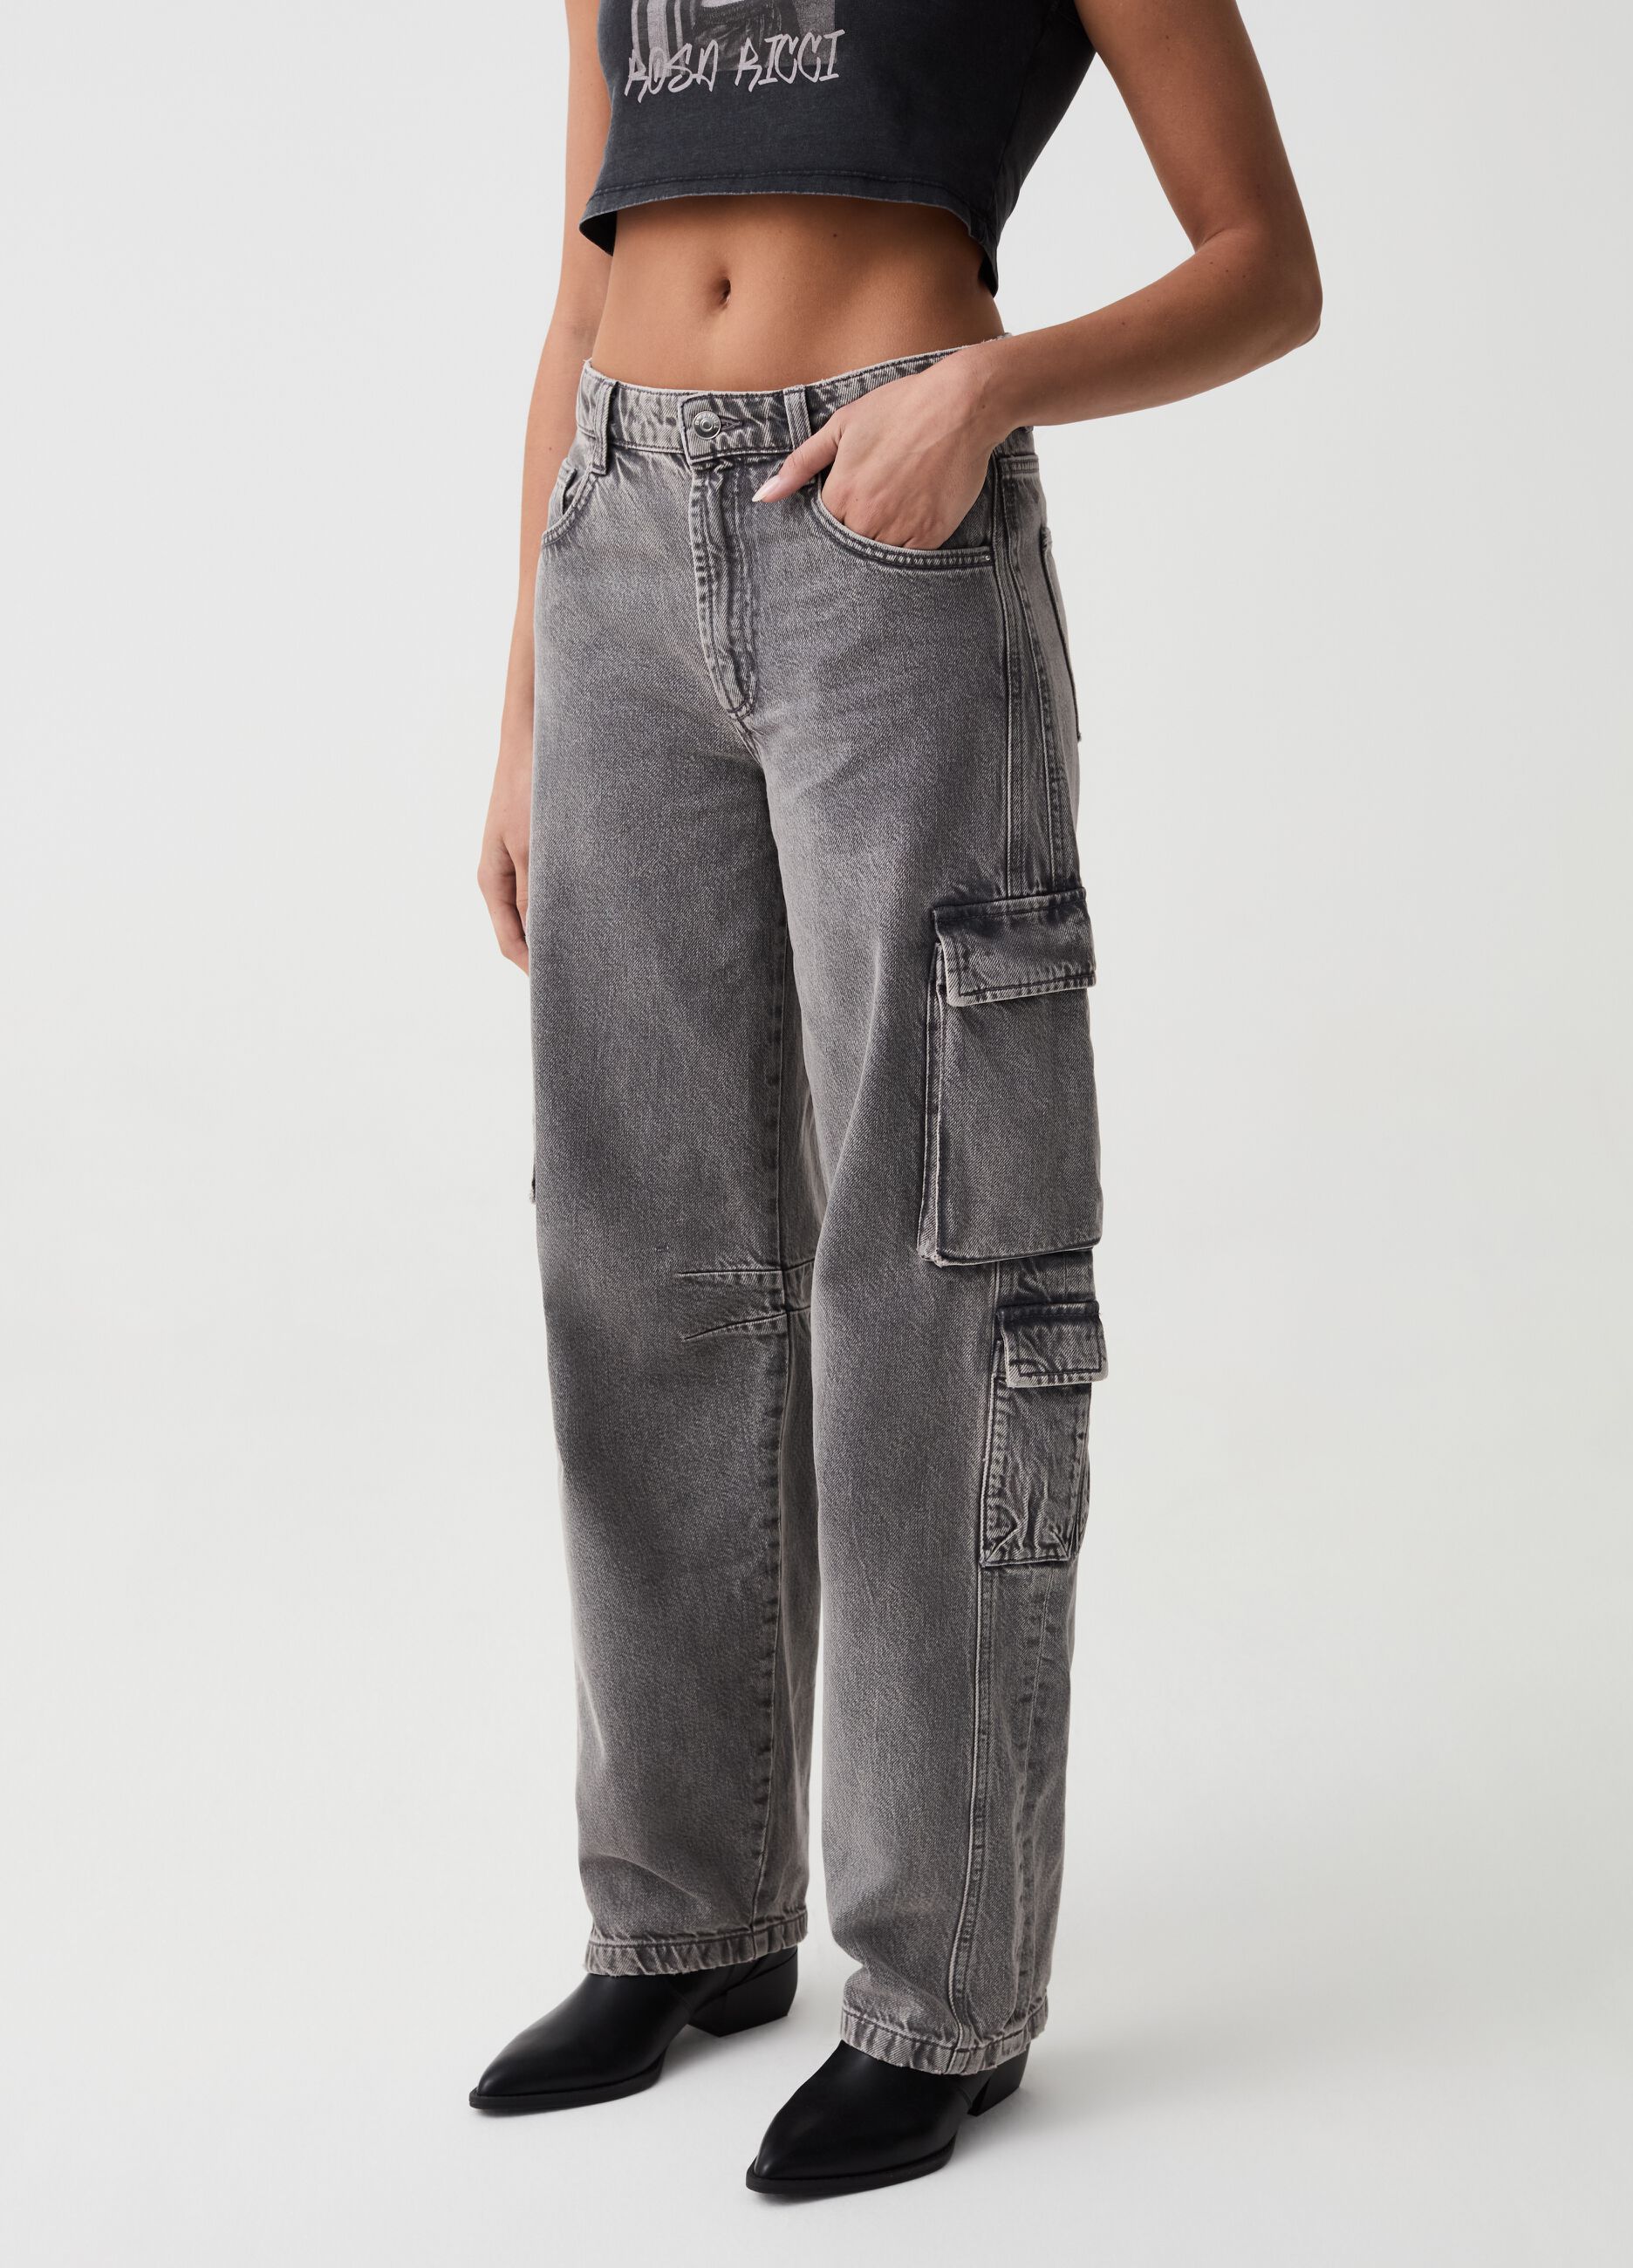 B.ANGEL FOR THE SEA BEYOND multi-pocket cargo jeans